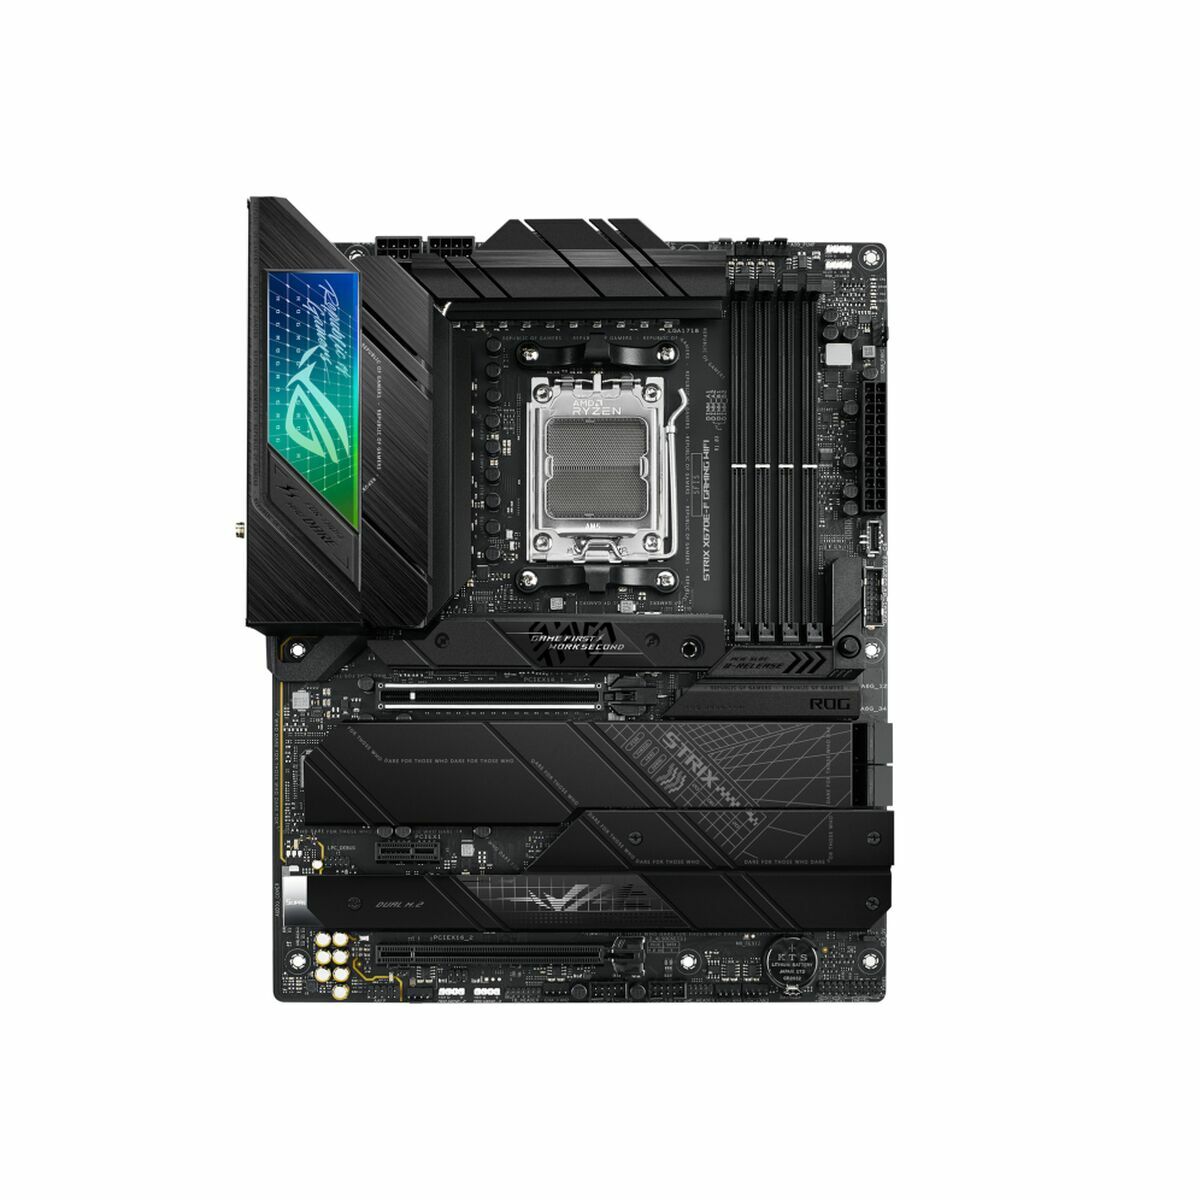 Motherboard Asus ROG STRIX X670E-F GAMING WIFI AMD AMD X670 AMD AM5, Asus, Computing, Components, motherboard-asus-rog-strix-x670e-f-gaming-wifi-amd-amd-x670-amd-am5, Brand_Asus, category-reference-2609, category-reference-2803, category-reference-2804, category-reference-t-19685, category-reference-t-19912, category-reference-t-21360, computers / components, Condition_NEW, Price_400 - 500, Teleworking, RiotNook